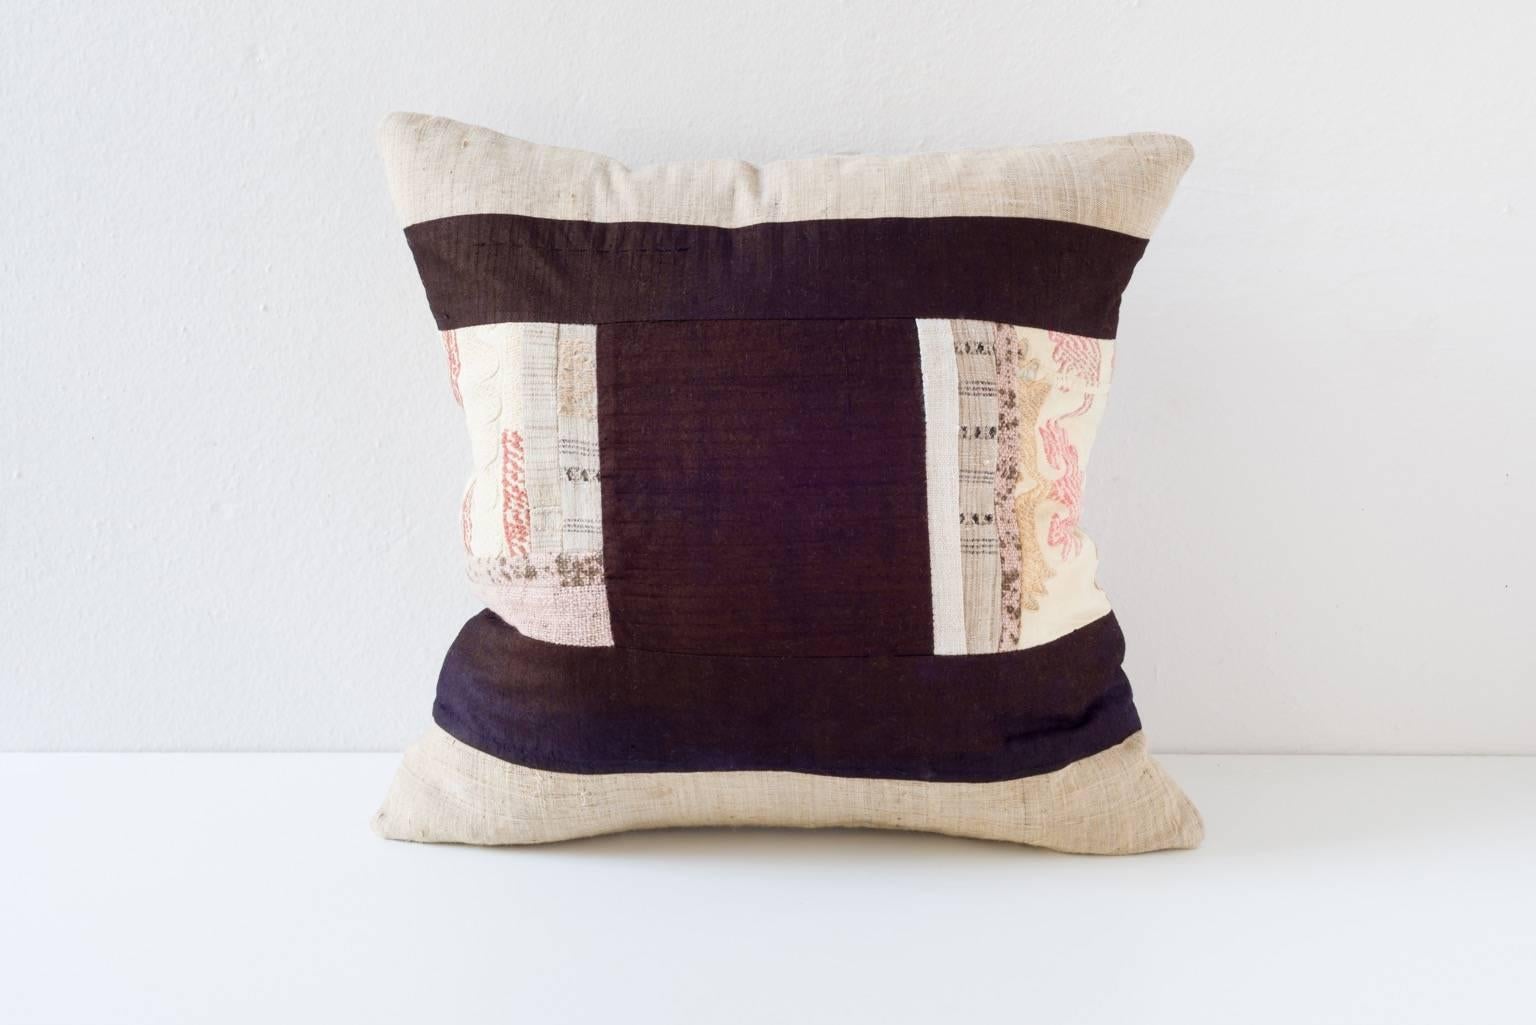 These bold pillows have central bands of Huang Ping County natural plant dyed cotton from vintage handwoven and pleated skirts with Miao handwoven hemp. These have been composed with Suzani textiles and Mali mud cloth along with contemporary linens